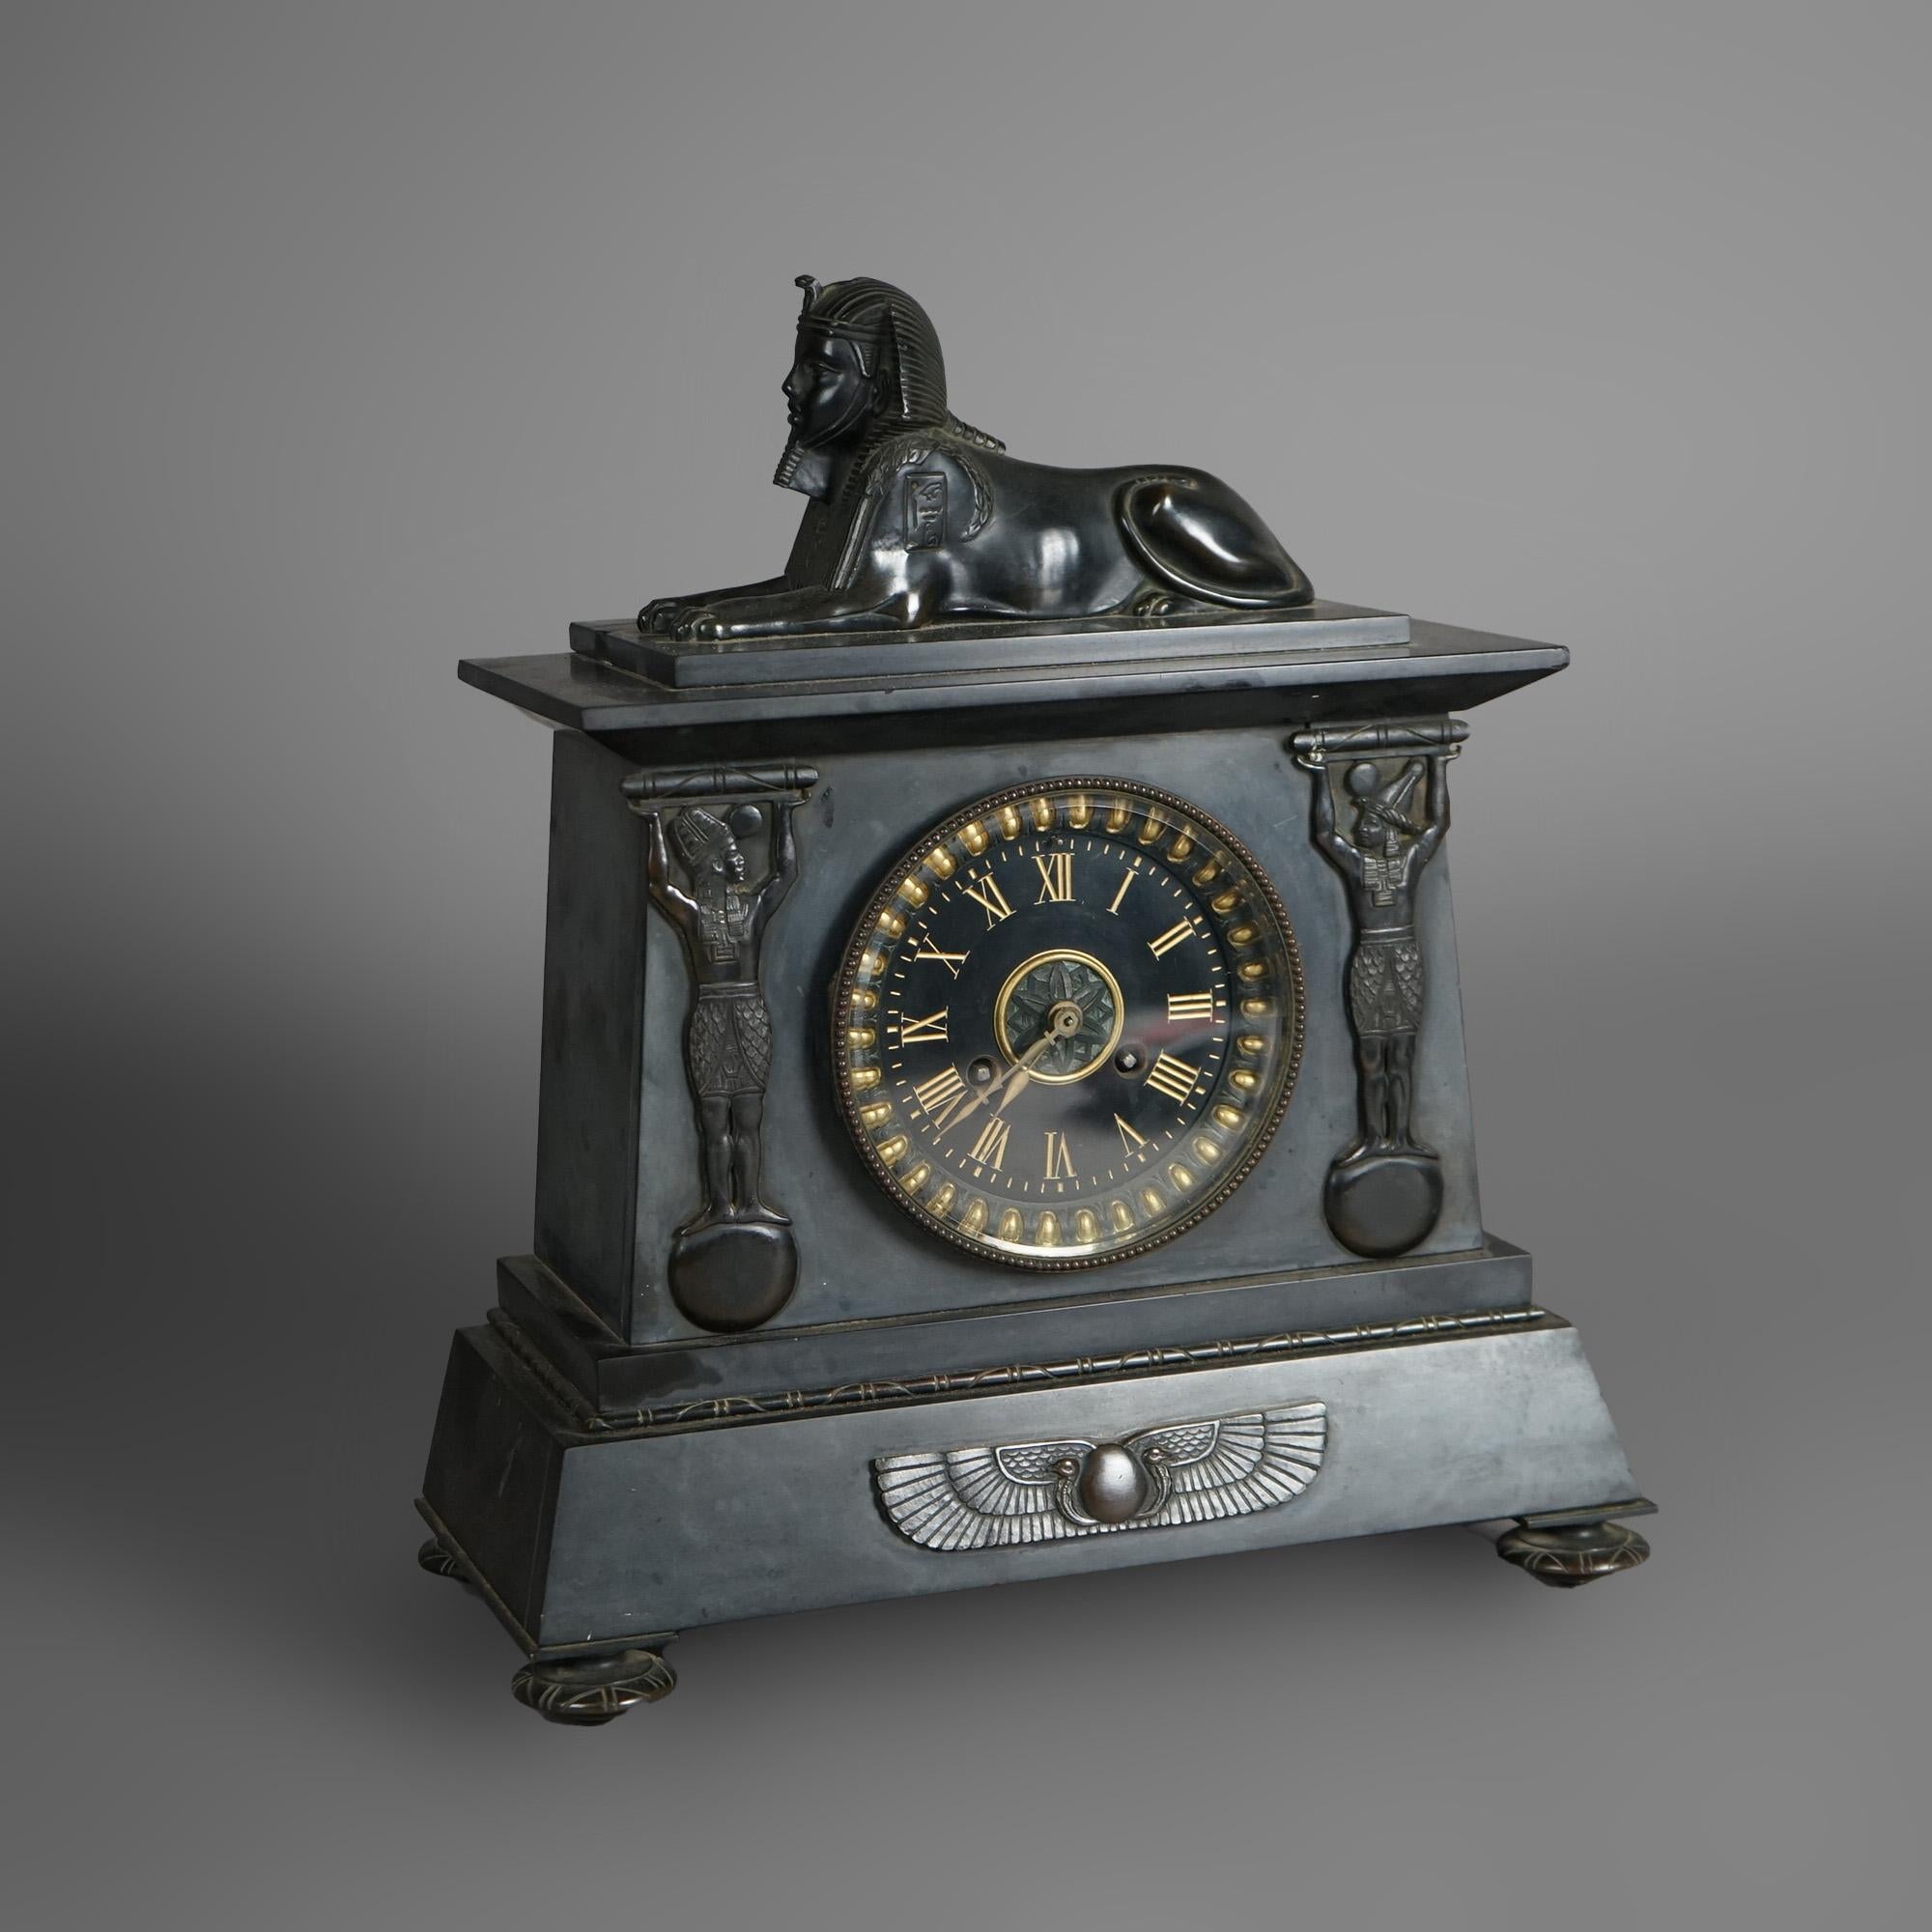 An antique Egyptian Revival figural mantel clock offers slate and bronze construction with sphinx over case having central clock face and flanking caryatides, c1880

Measures - 14.75